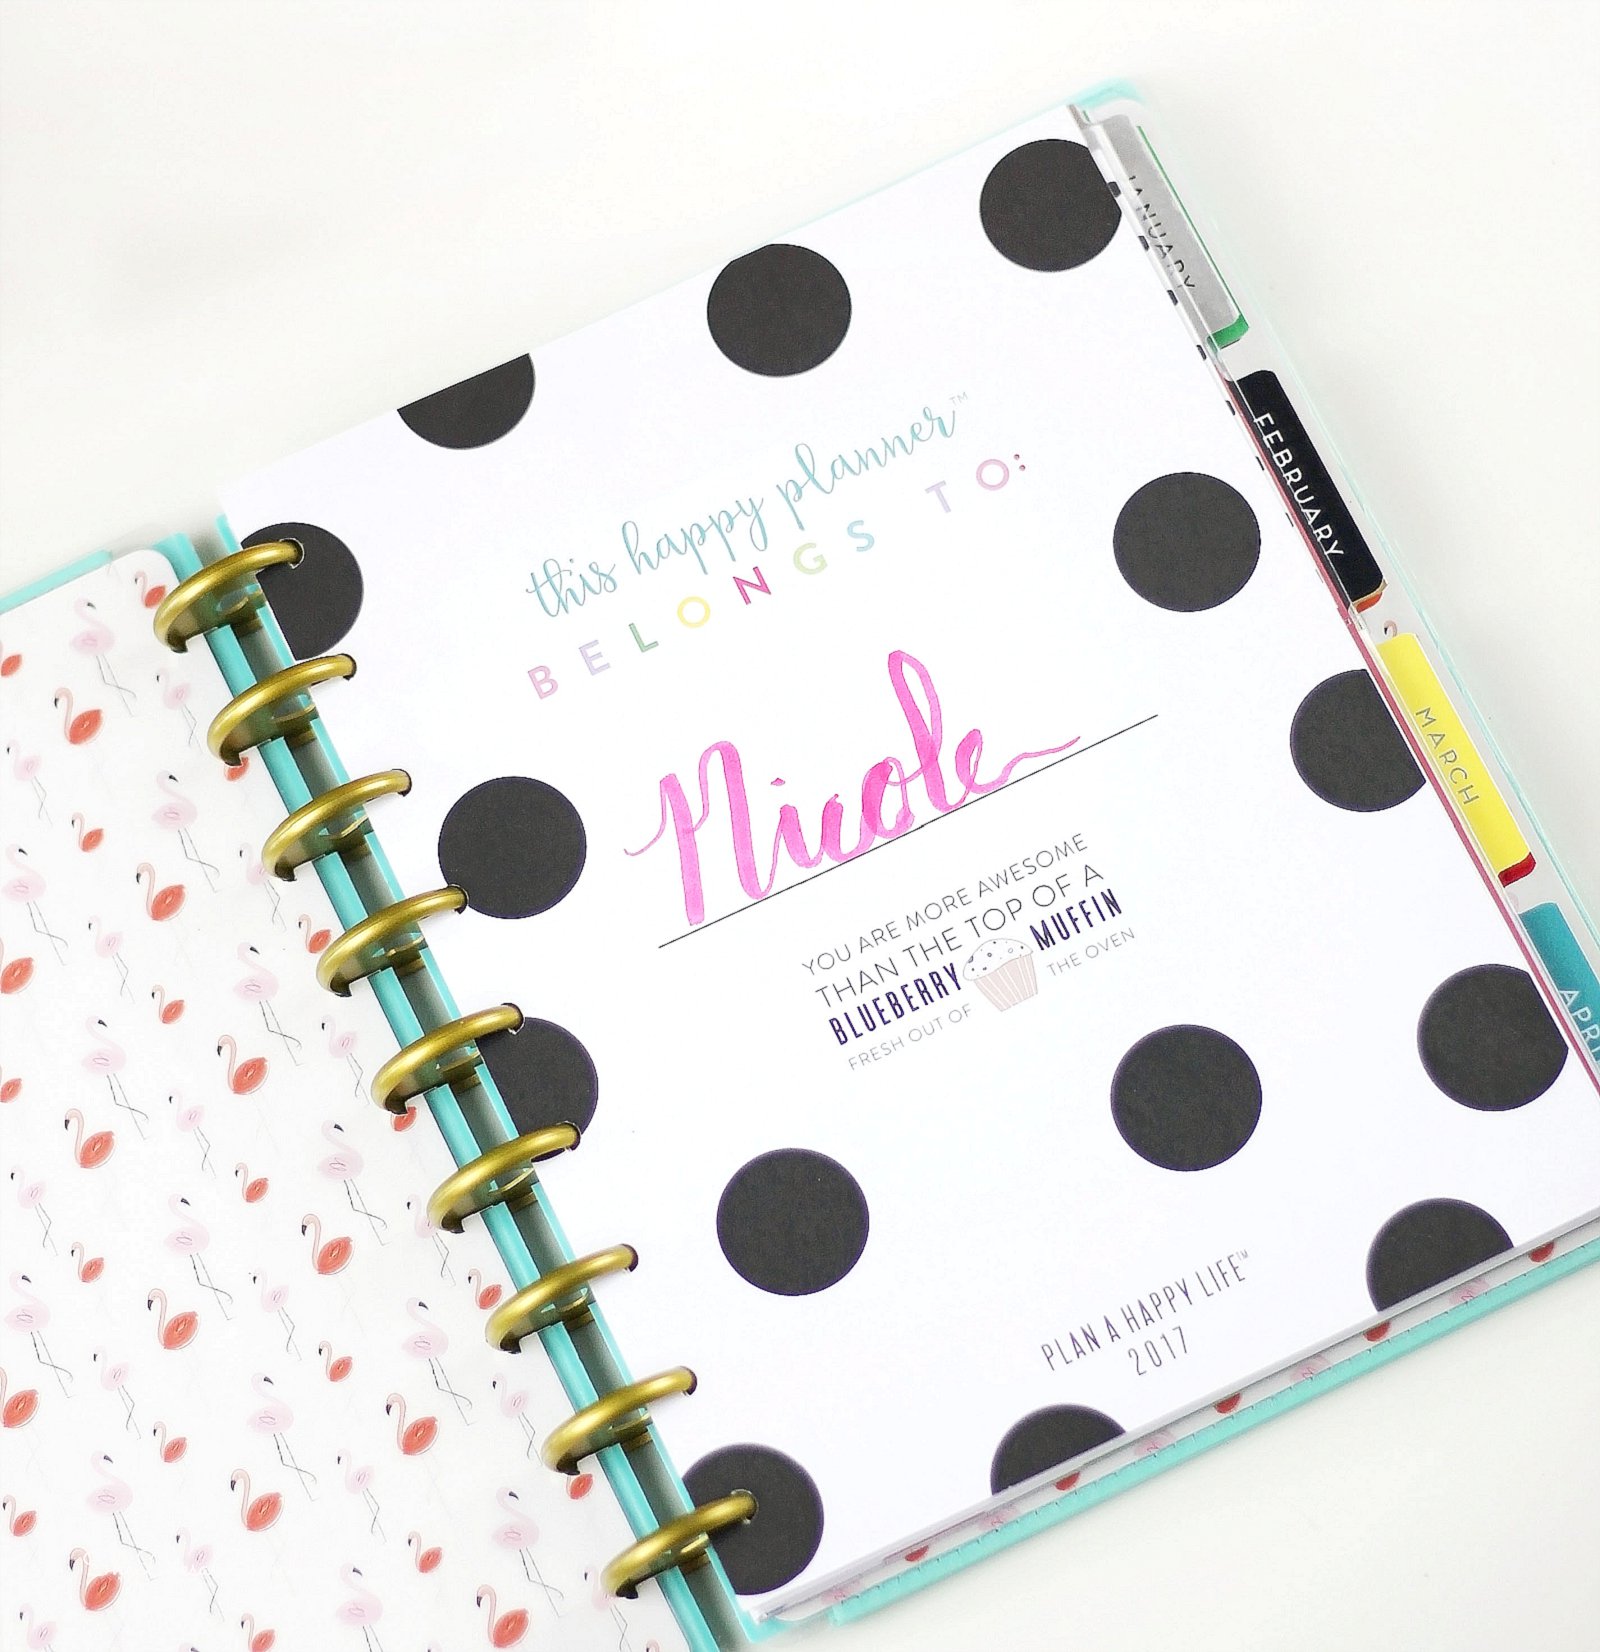 She Does a Bunch 2017 Planner Line Up